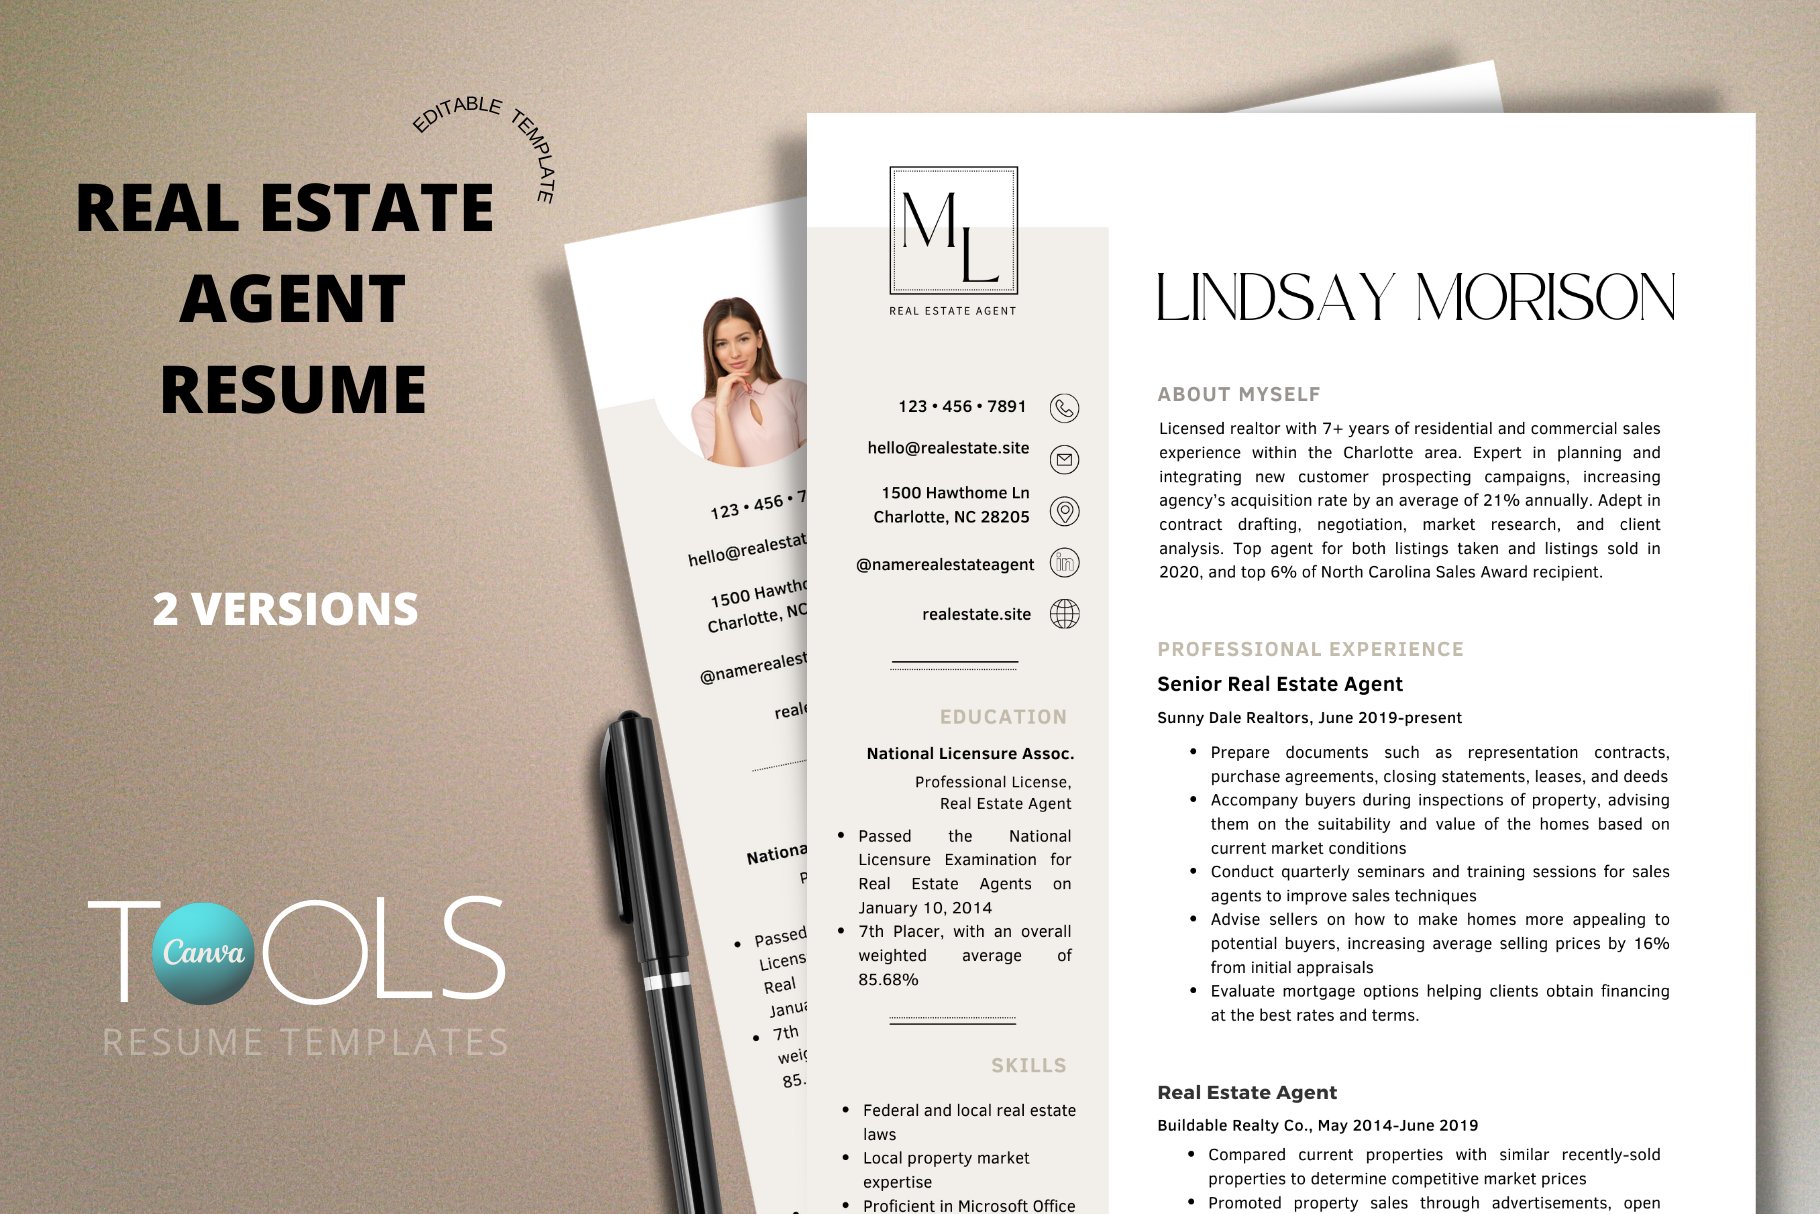 Real Estate Resume Template preview image.